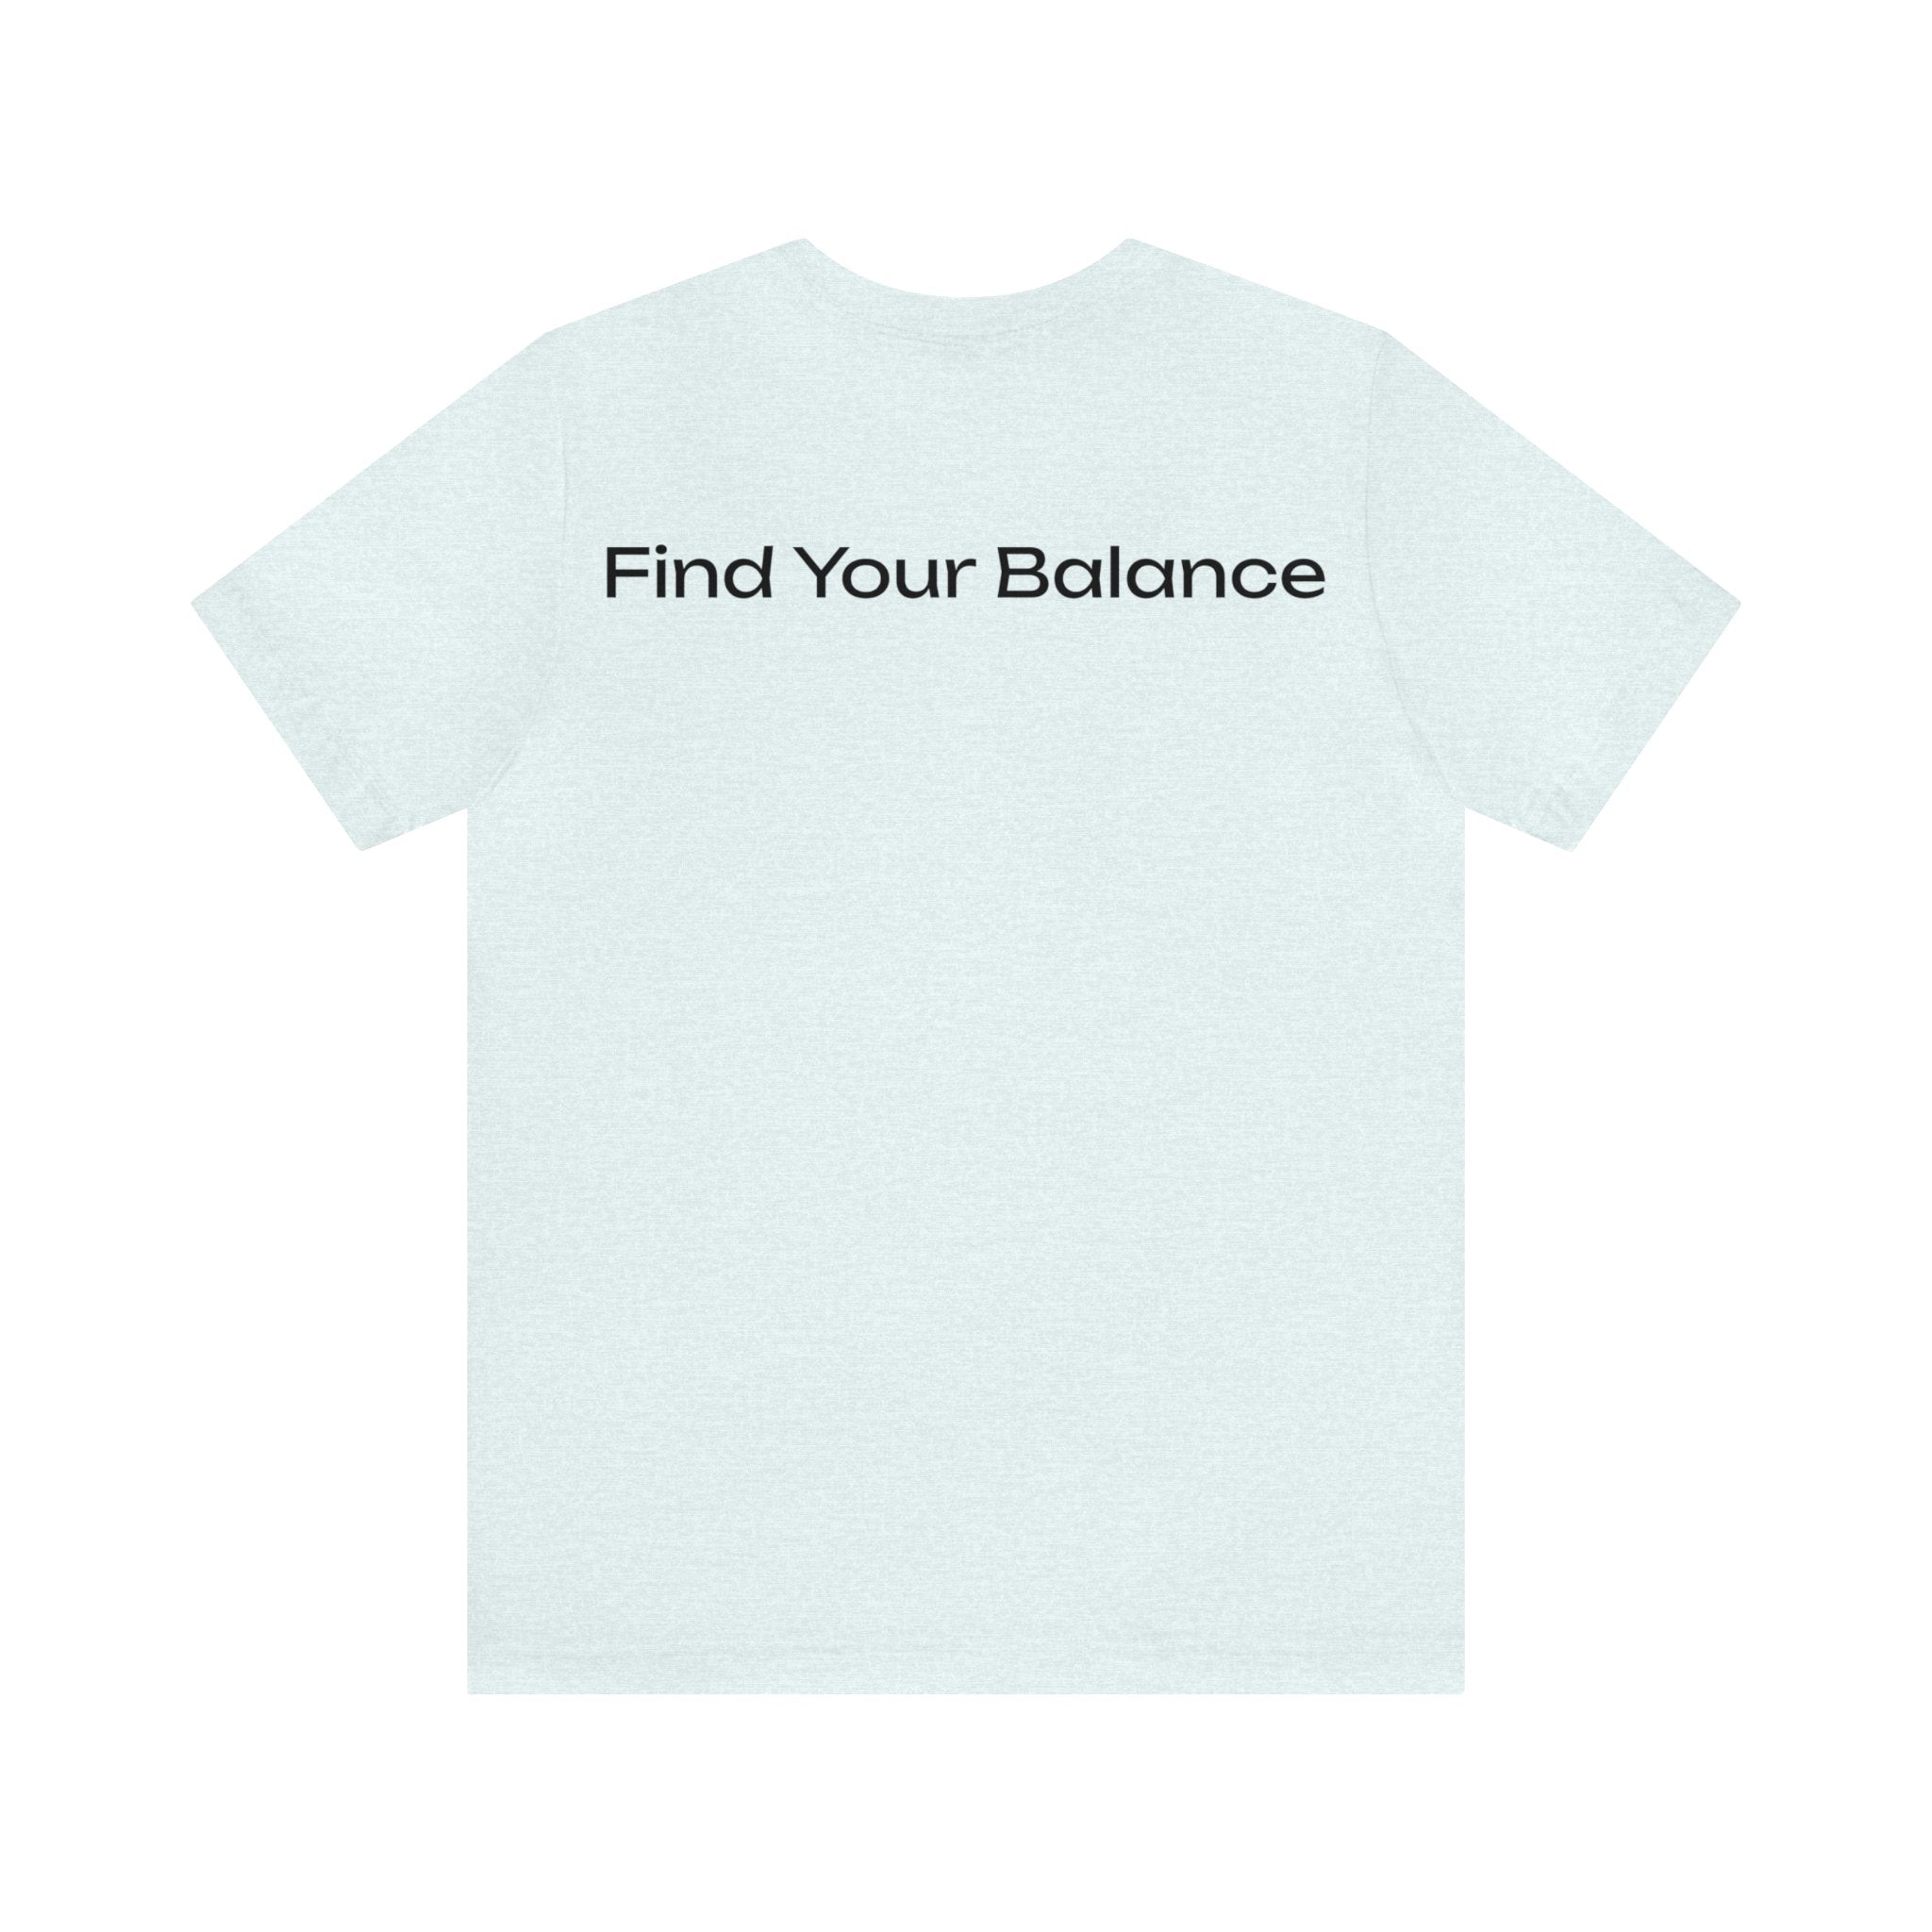 Find Your Balance Jersey Tee - Bella+Canvas 3001 Heather Mauve Airlume Cotton Bella+Canvas 3001 Crew Neckline Jersey Short Sleeve Lightweight Fabric Mental Health Support Retail Fit Tear-away Label Tee Unisex Tee T-Shirt 11519189424028457054_2048 Printify